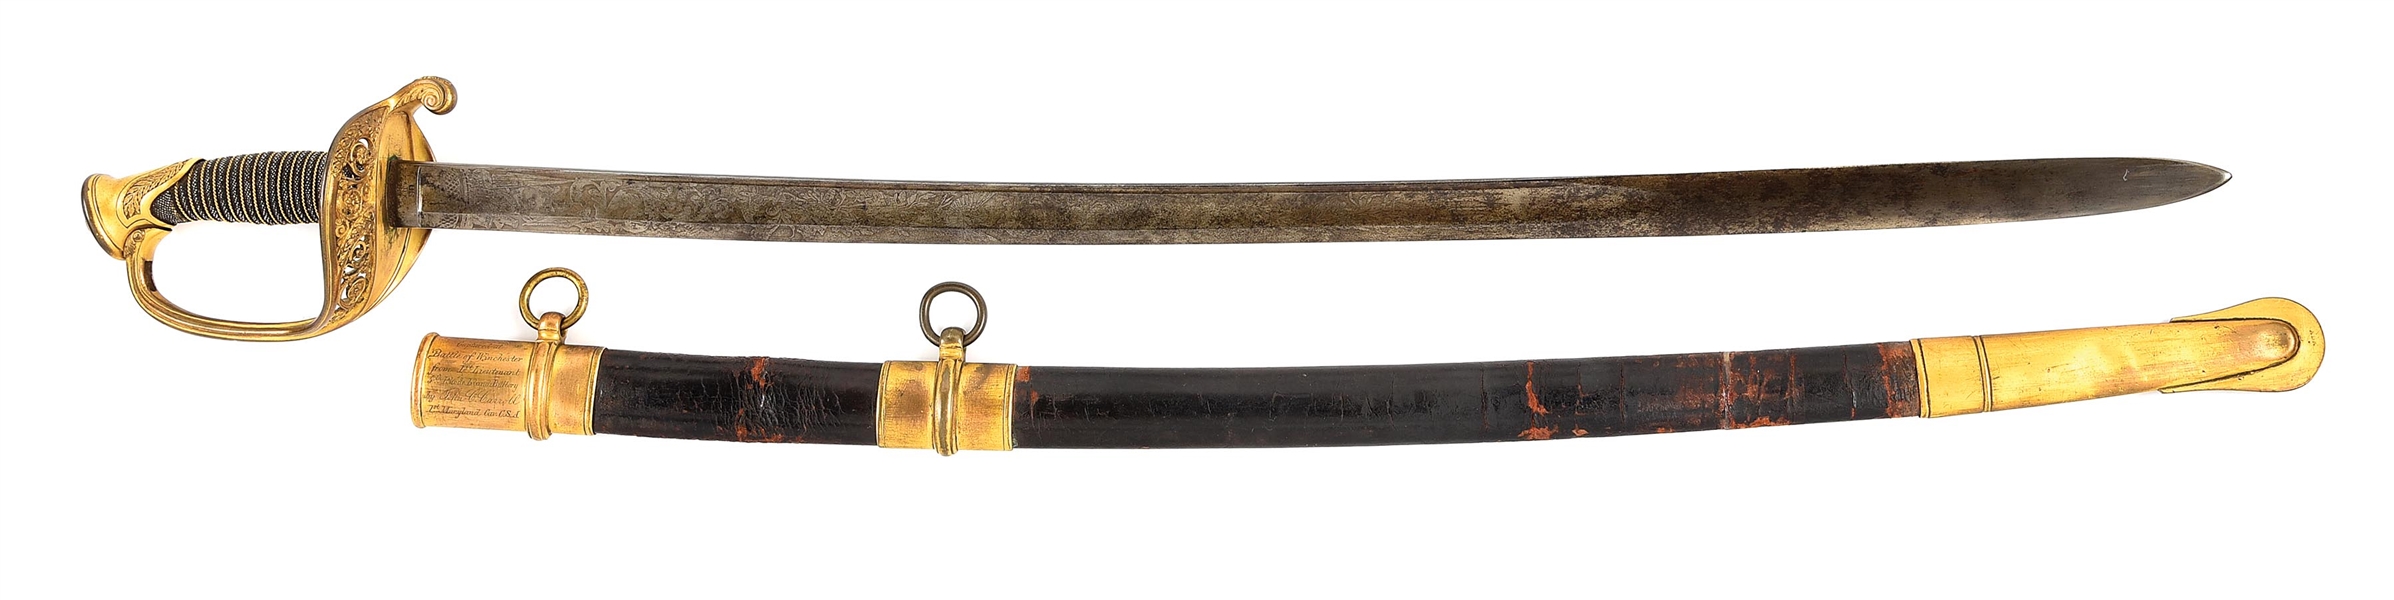 US M1850 FOOT OFFICERS SWORD CAPTURED AT BATTLE OF WINCHESTER BY JOHN C. CARROLL 1ST MARYLAND CAVALRY, CSA.